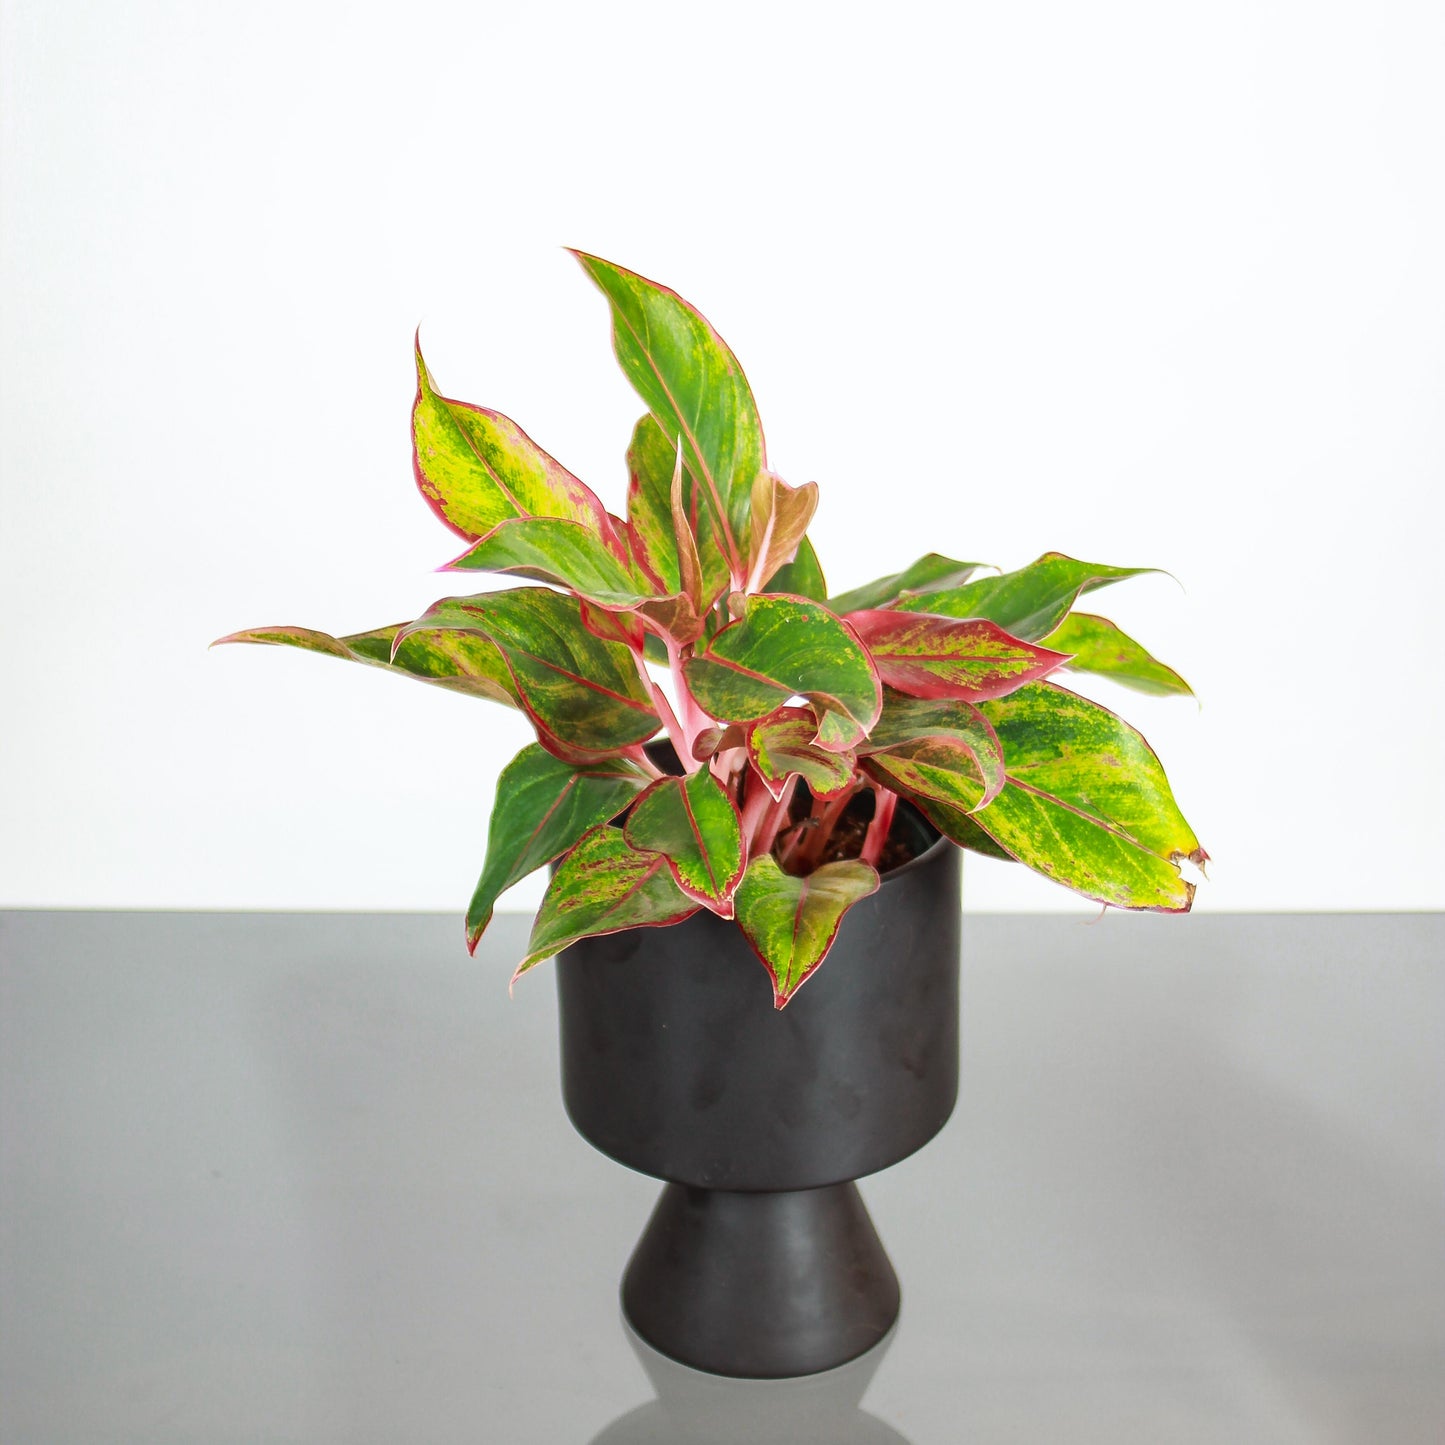 Chinese Evergreen (Aglaonema 'Siam Red Gold') in a 6 inch pot. Indoor plant for sale by Promise Supply for delivery and pickup in Toronto